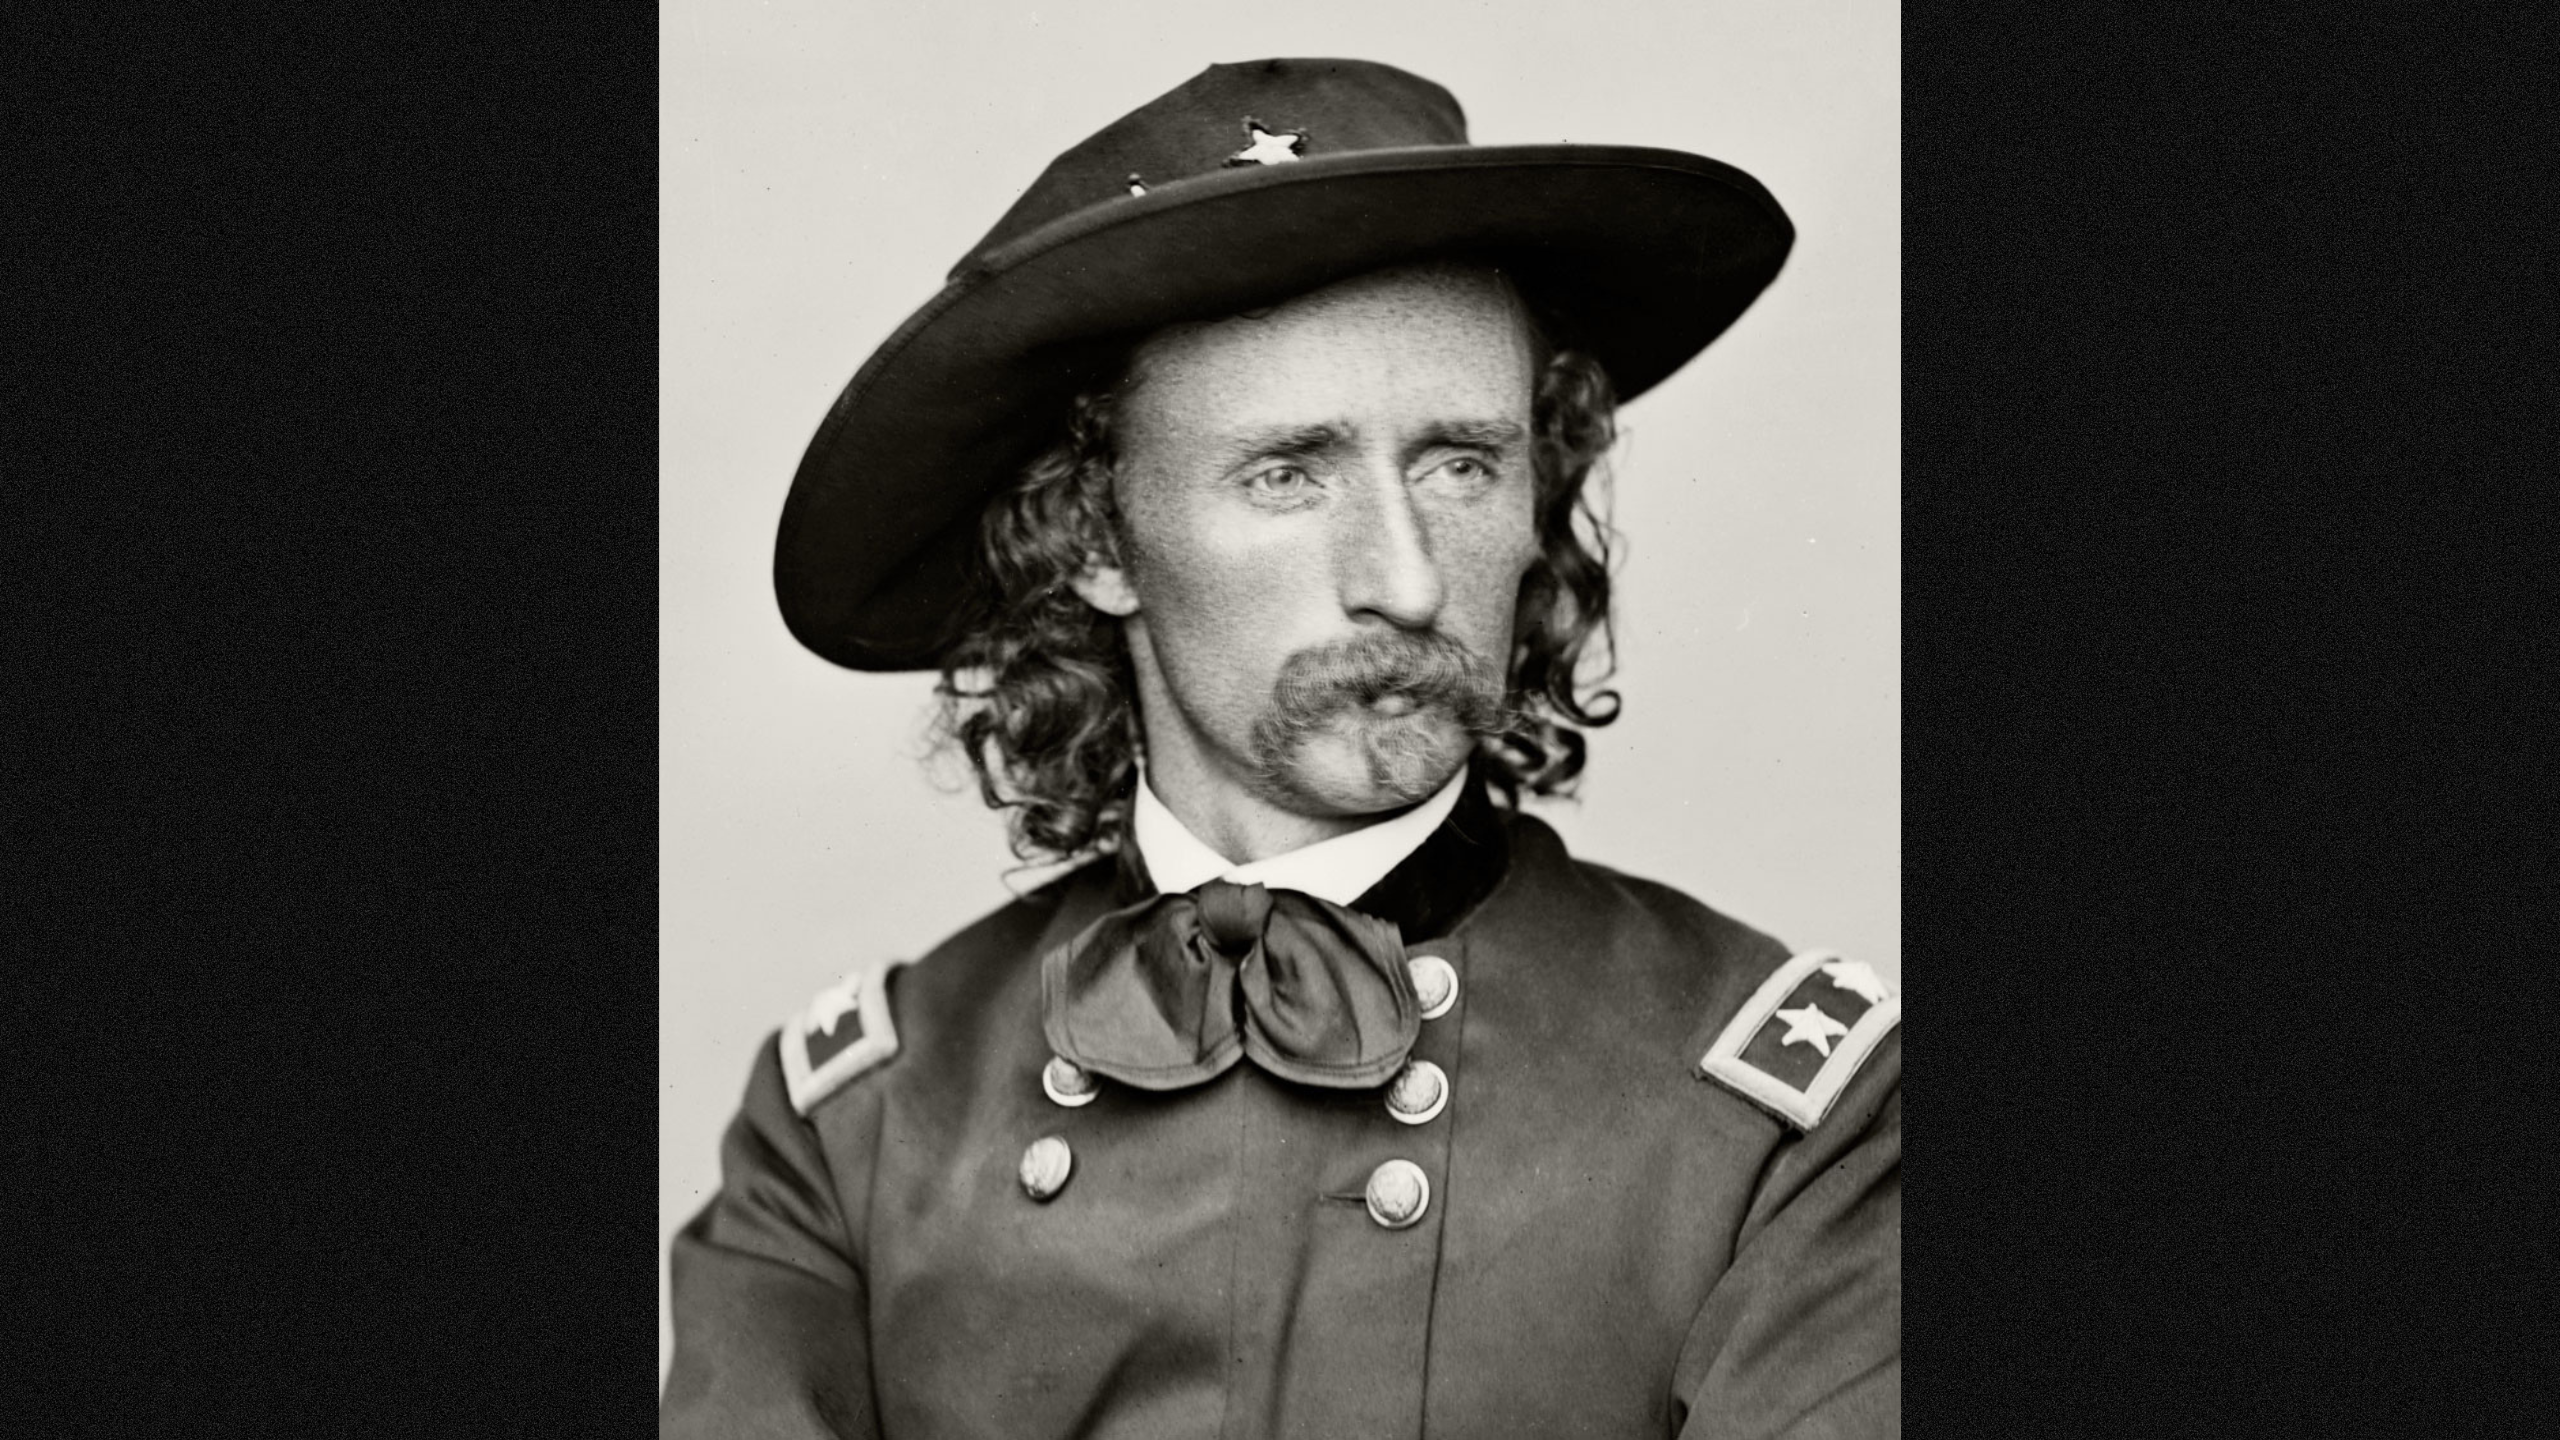 George Armstrong Custer in black and white, May 1865 (Library of Congress, Prints and Photographs Division)